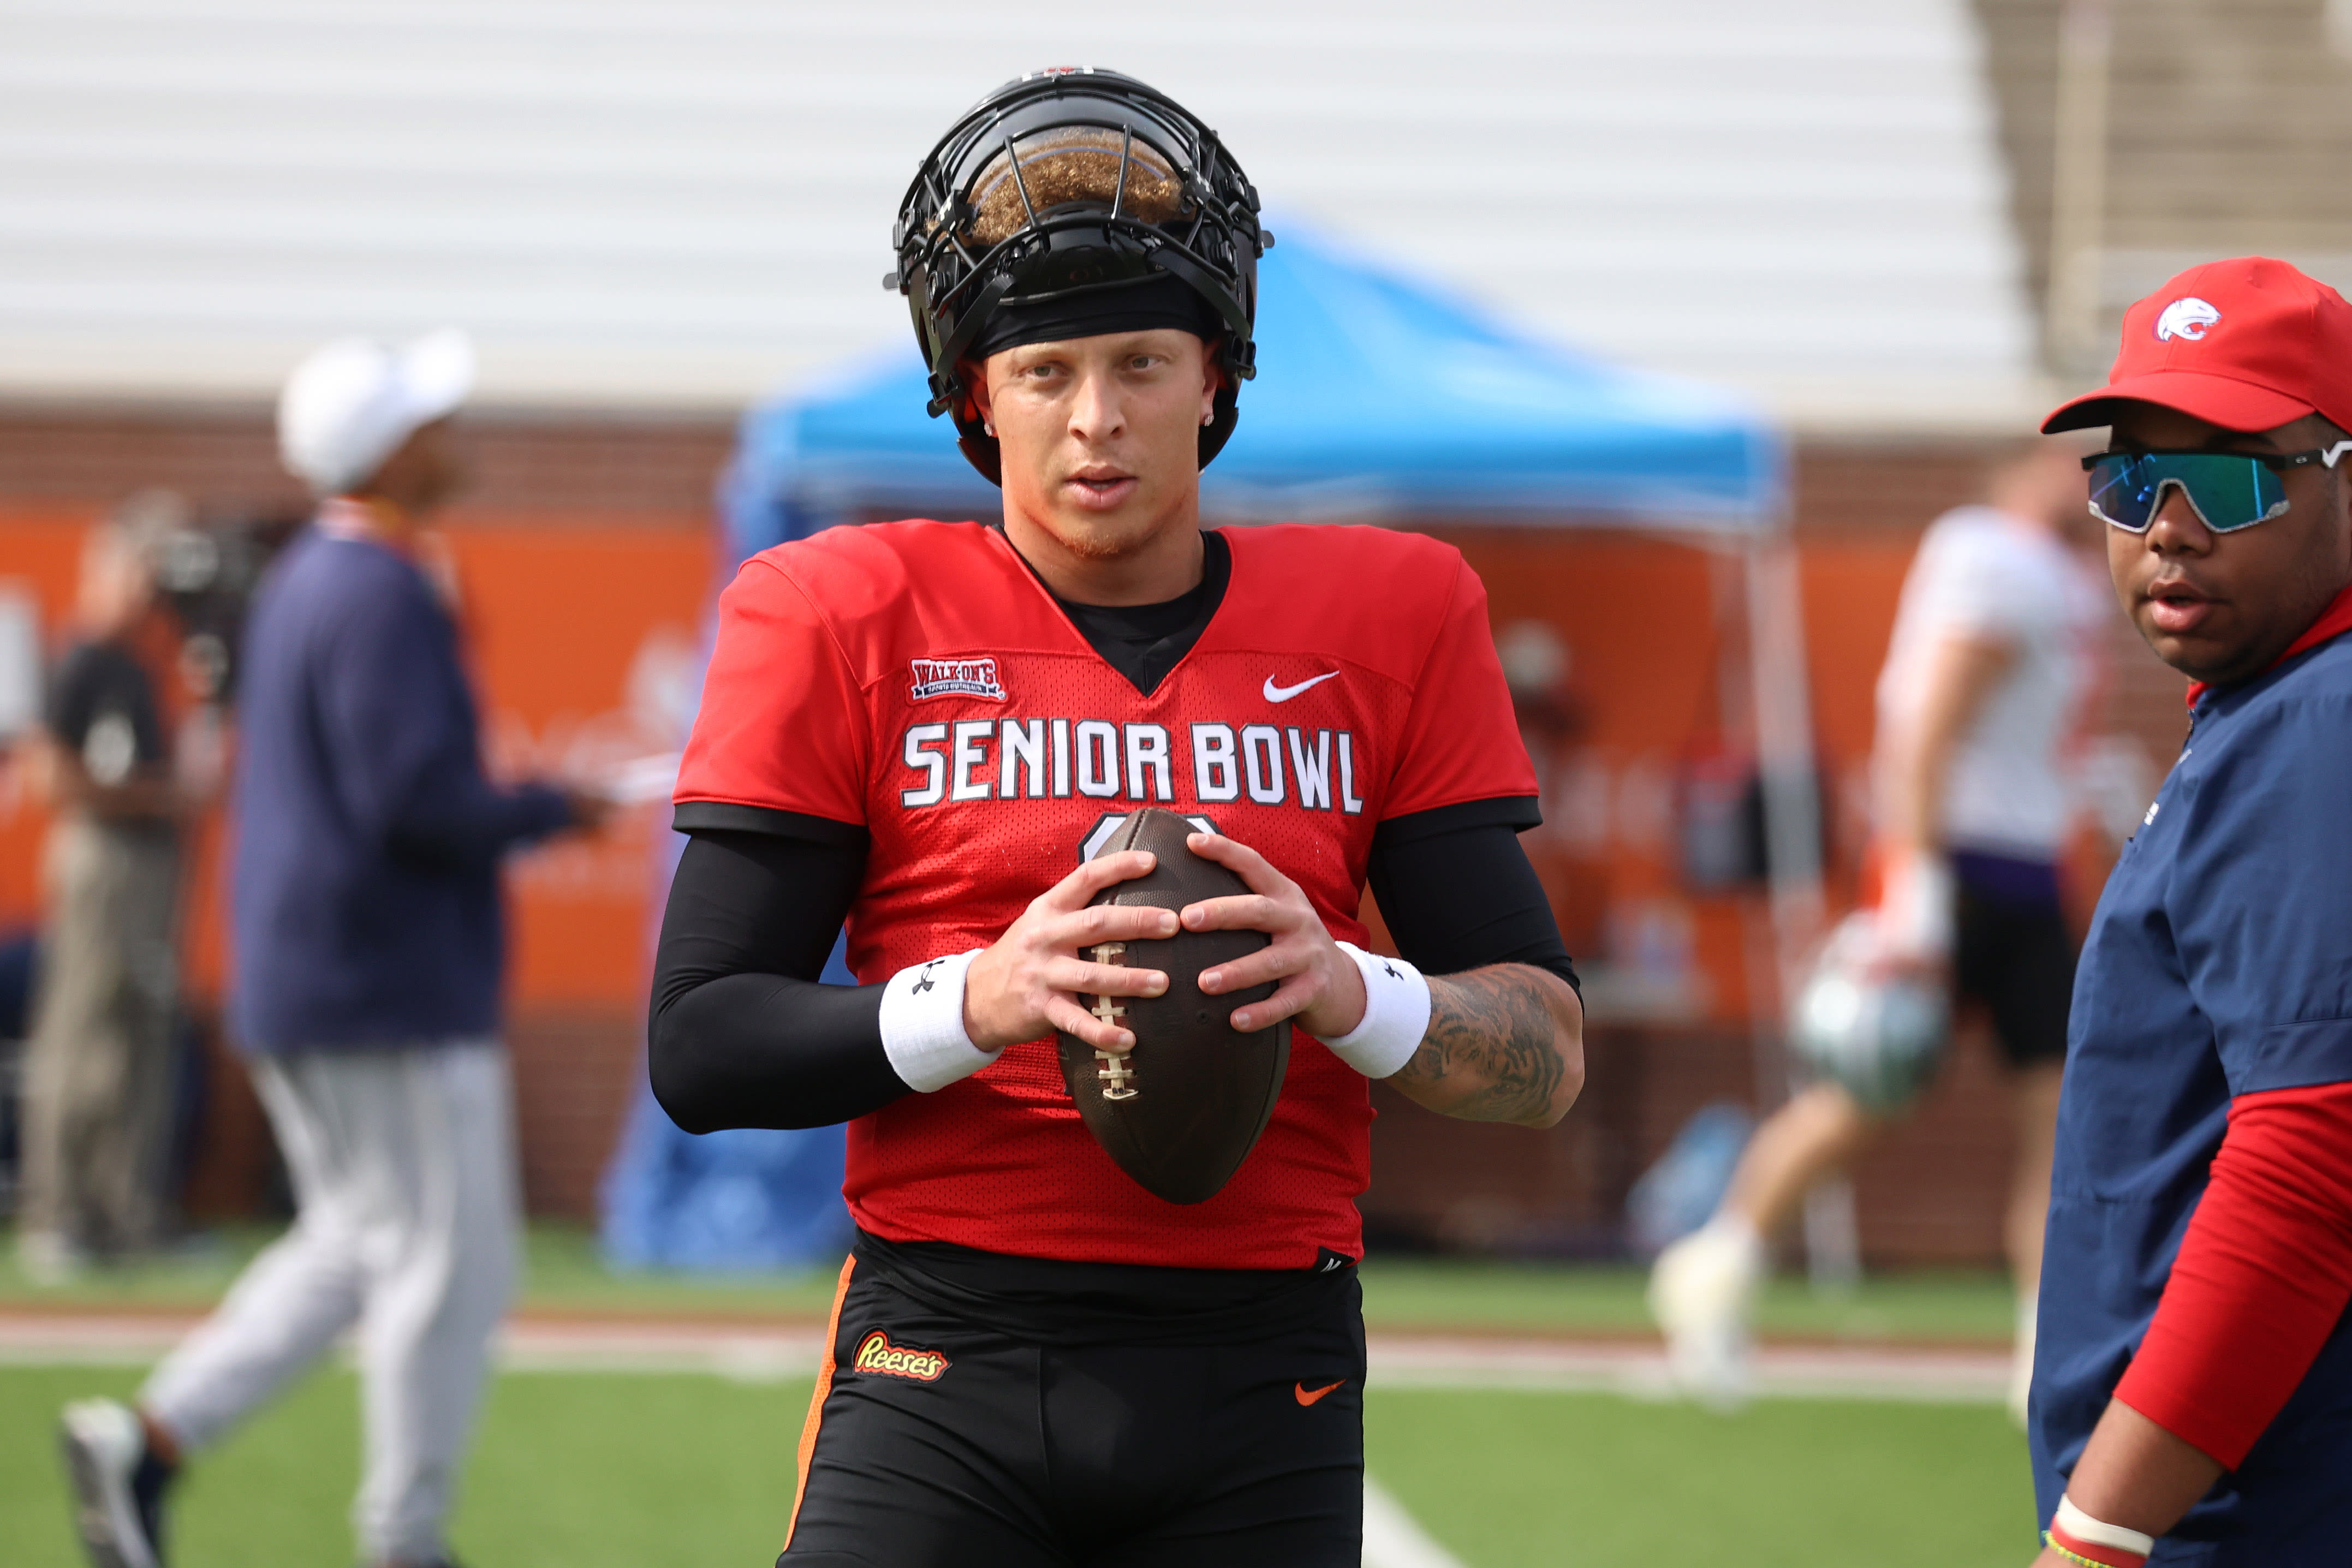 NFL Draft: Spencer Rattler's long wait ends, as Saints draft him in the 5th round